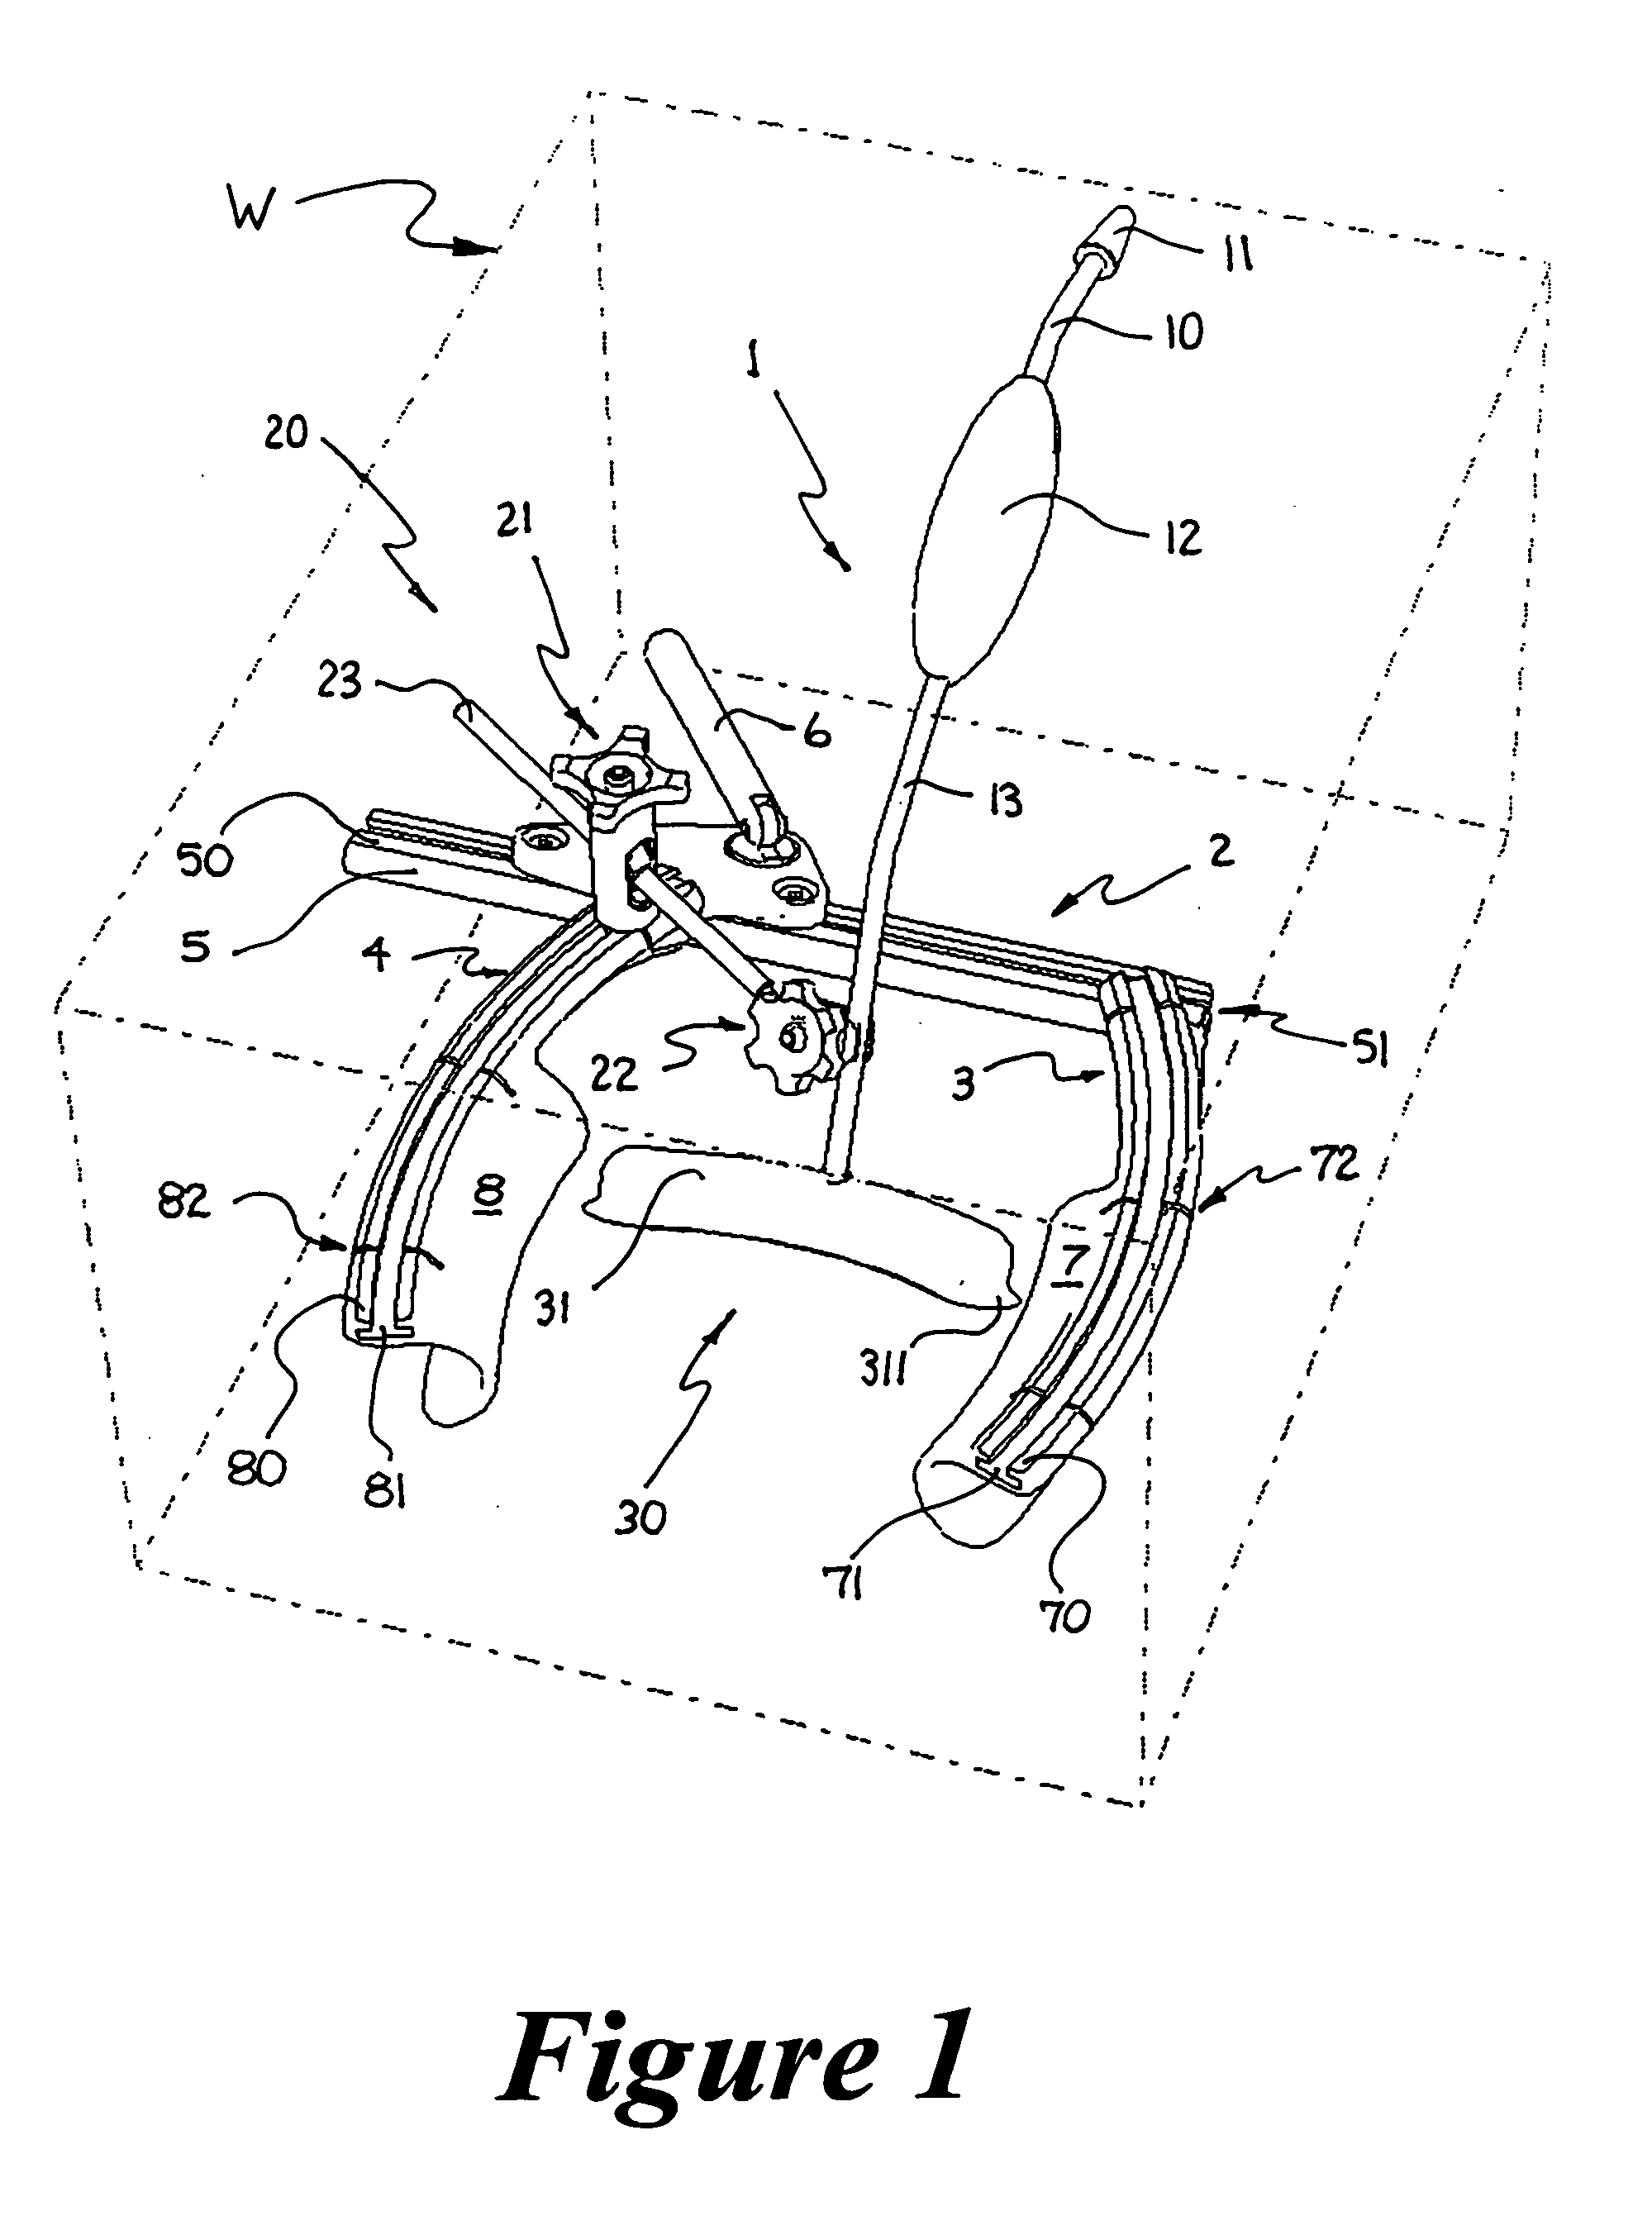 Surgical device and method for pericardium retraction